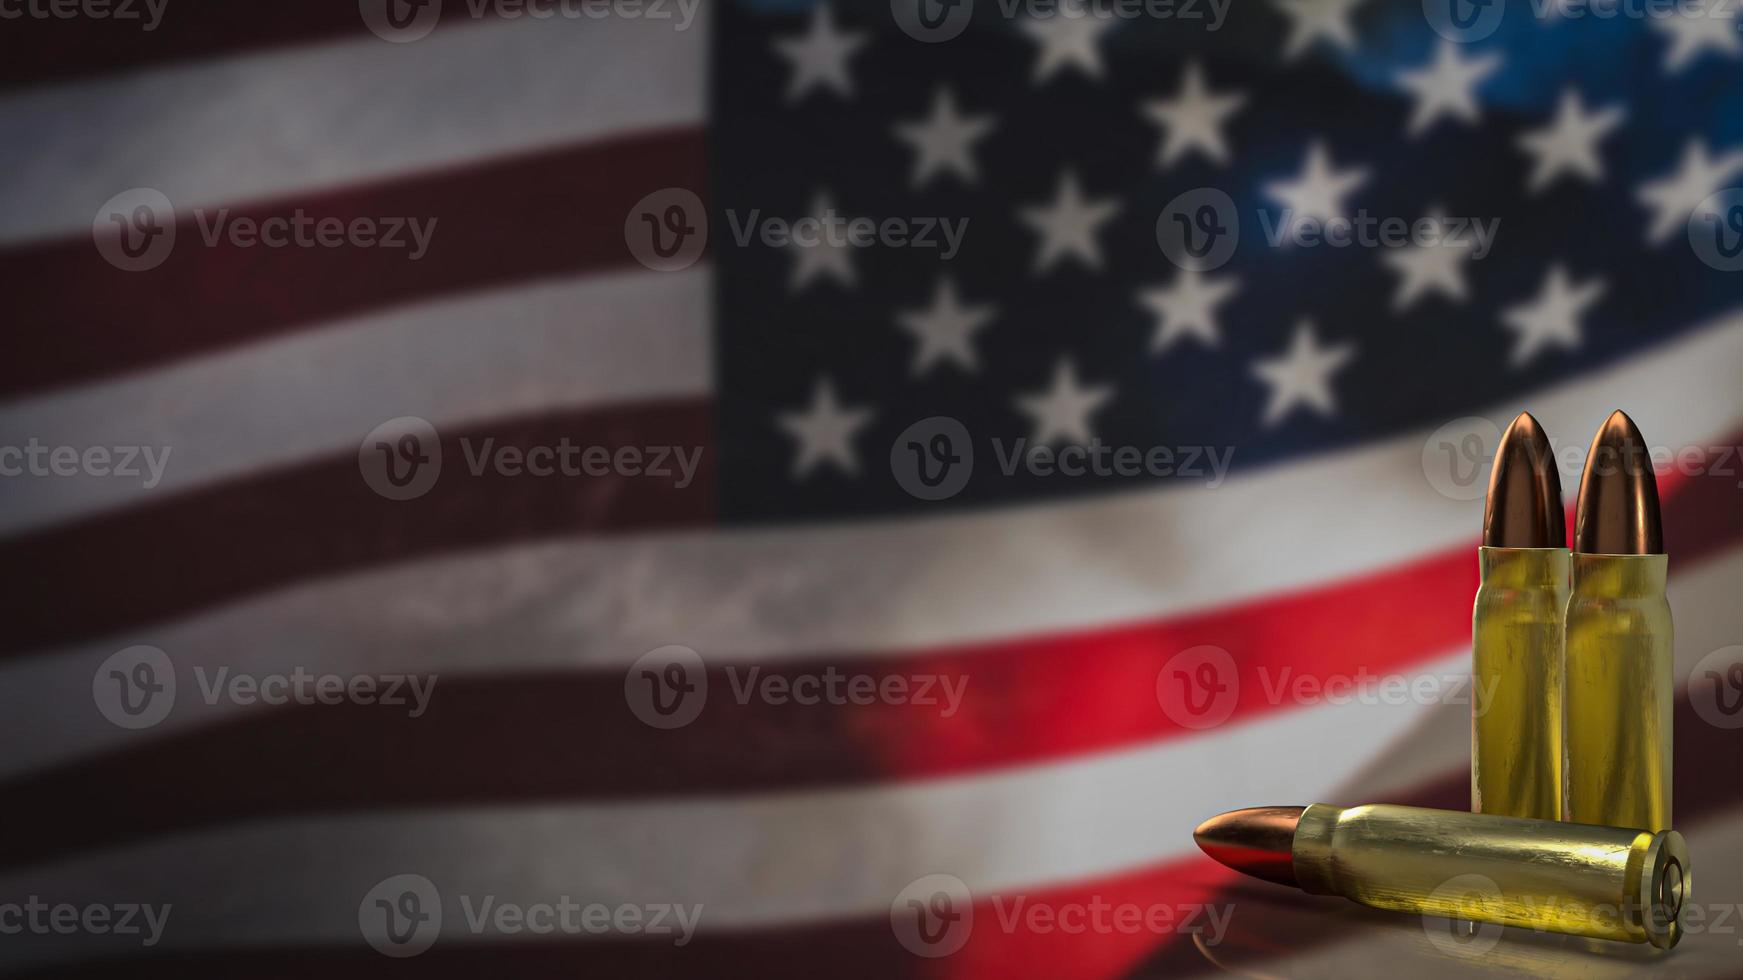 The bullet on Usa flag for law or crime concept 3d rendering photo